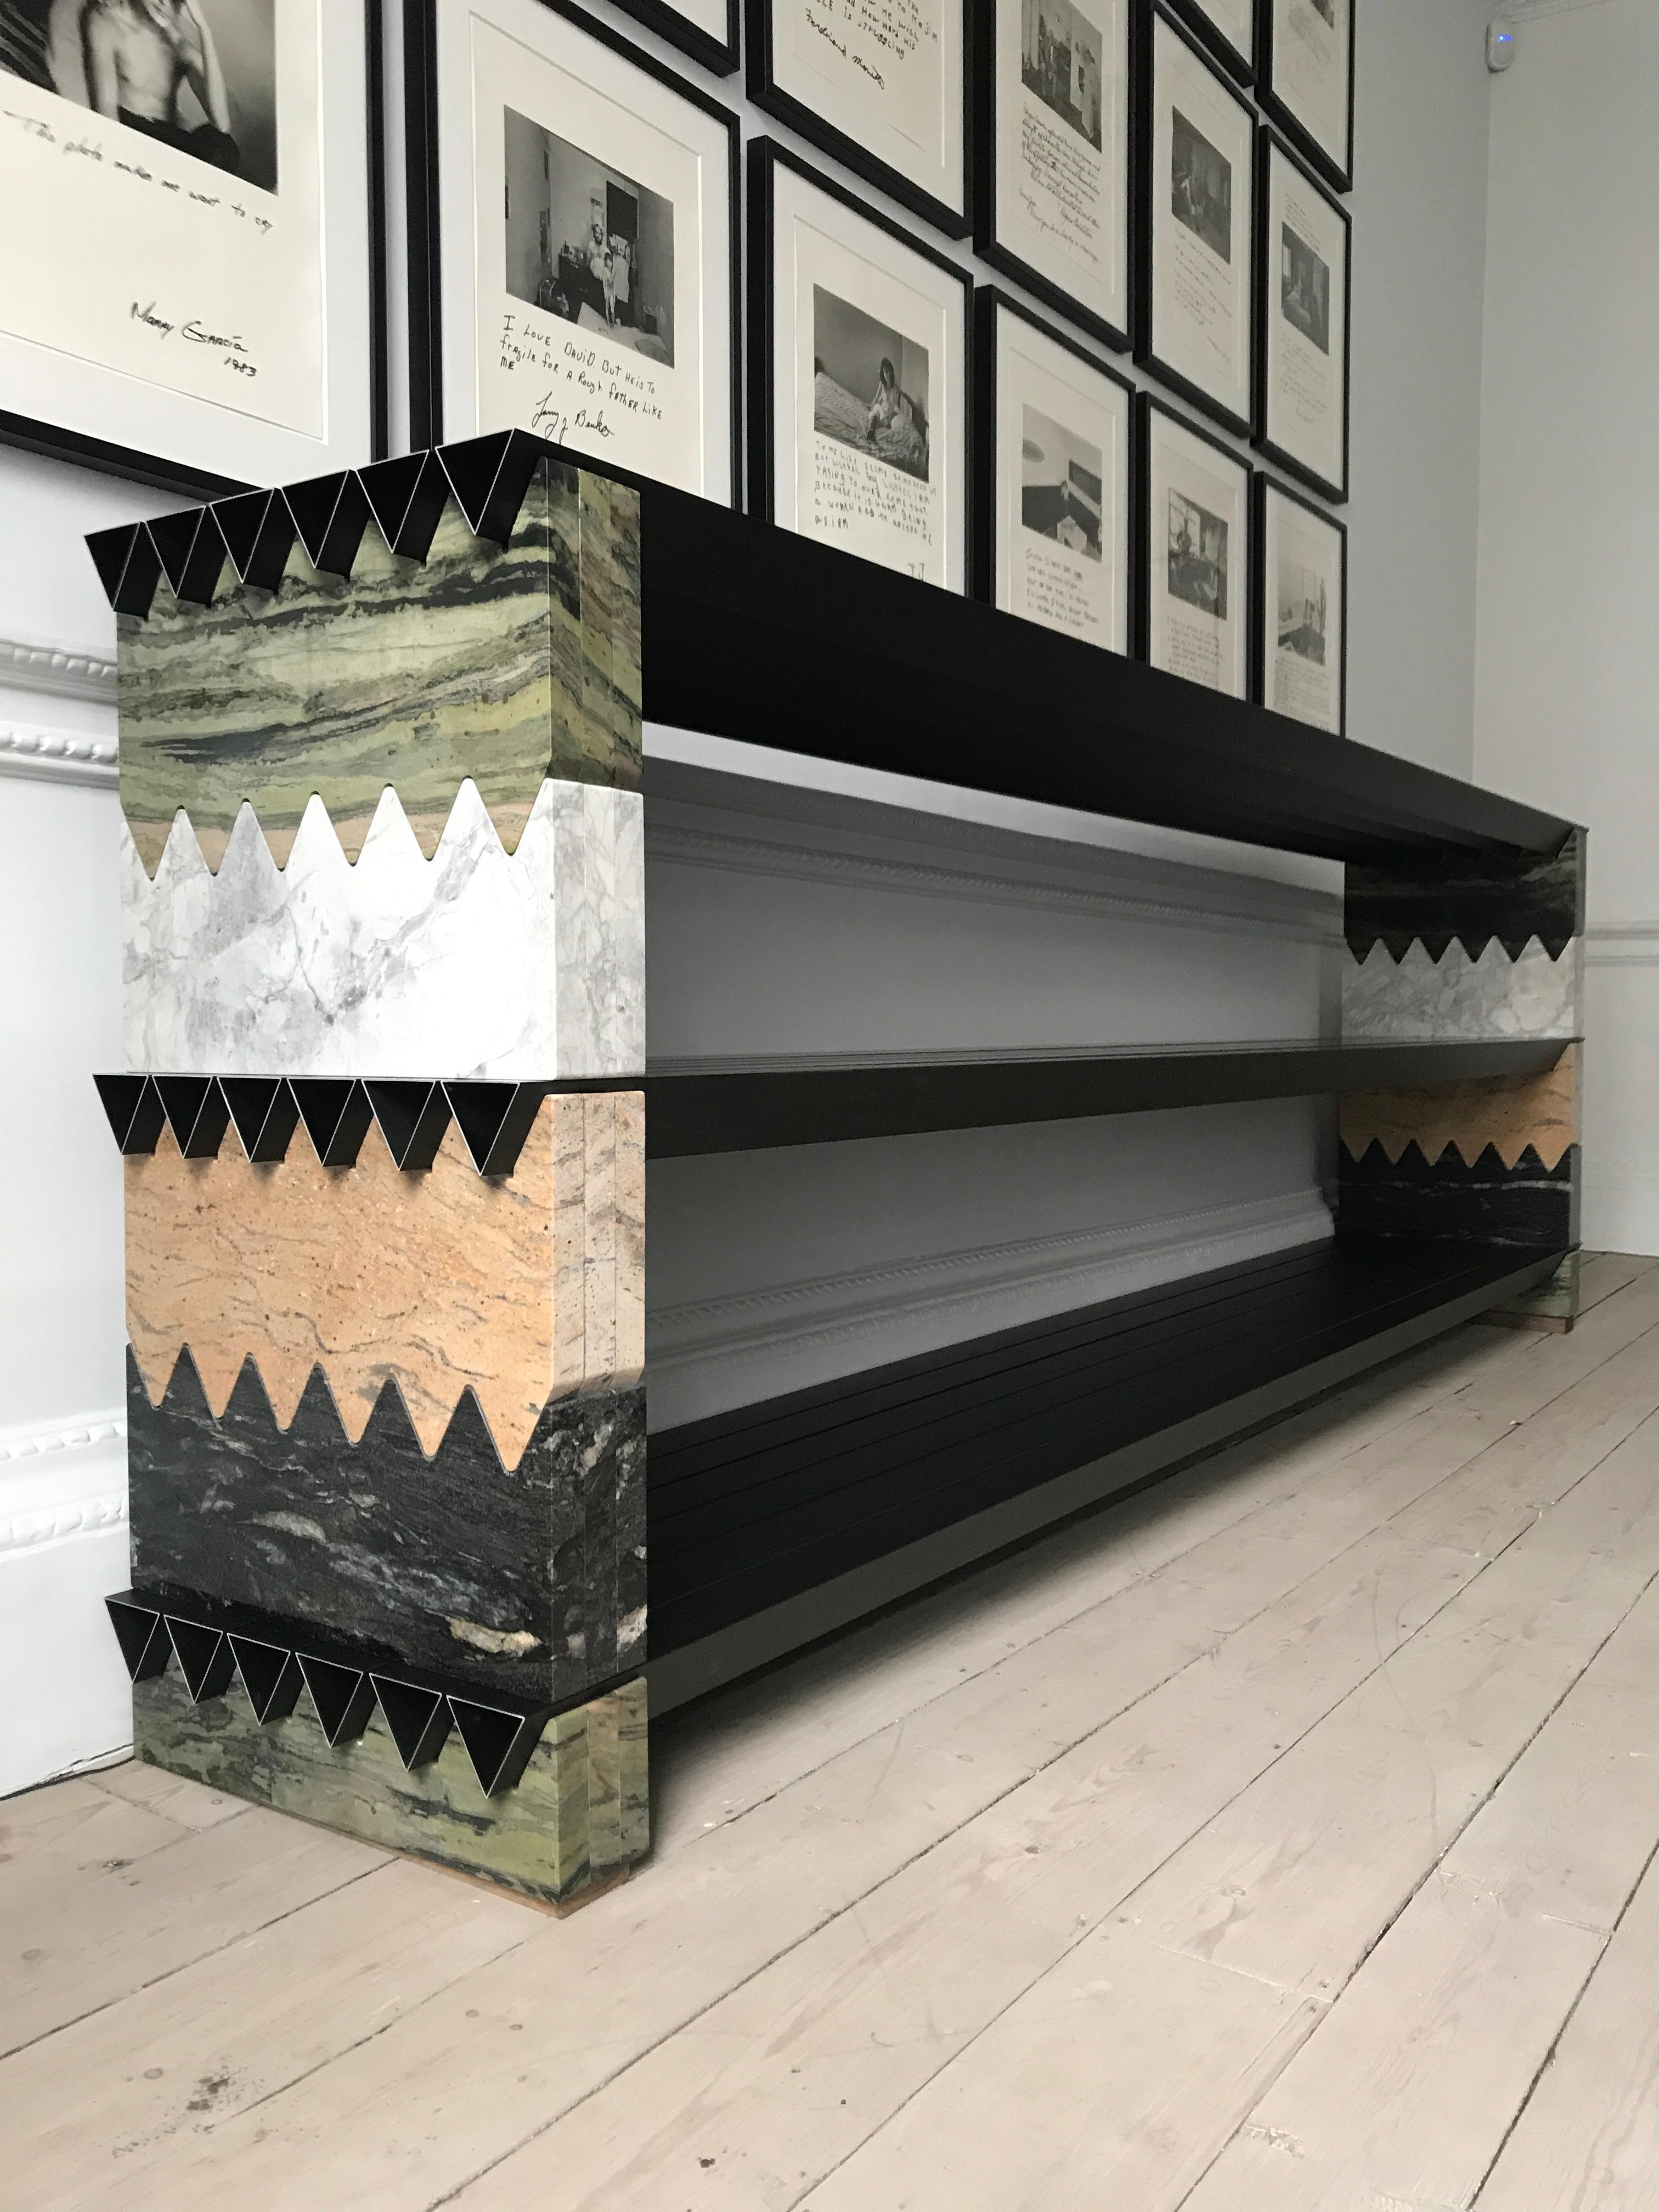 Brick and beam sideboard by Adam Blencowe
Materials: Granite, anodised aluminium
Dimensions: 300 x 80 x 50 cm

A new work produced using different granite slabs cut to interlock with each other and black
anodised aluminium beams. The components